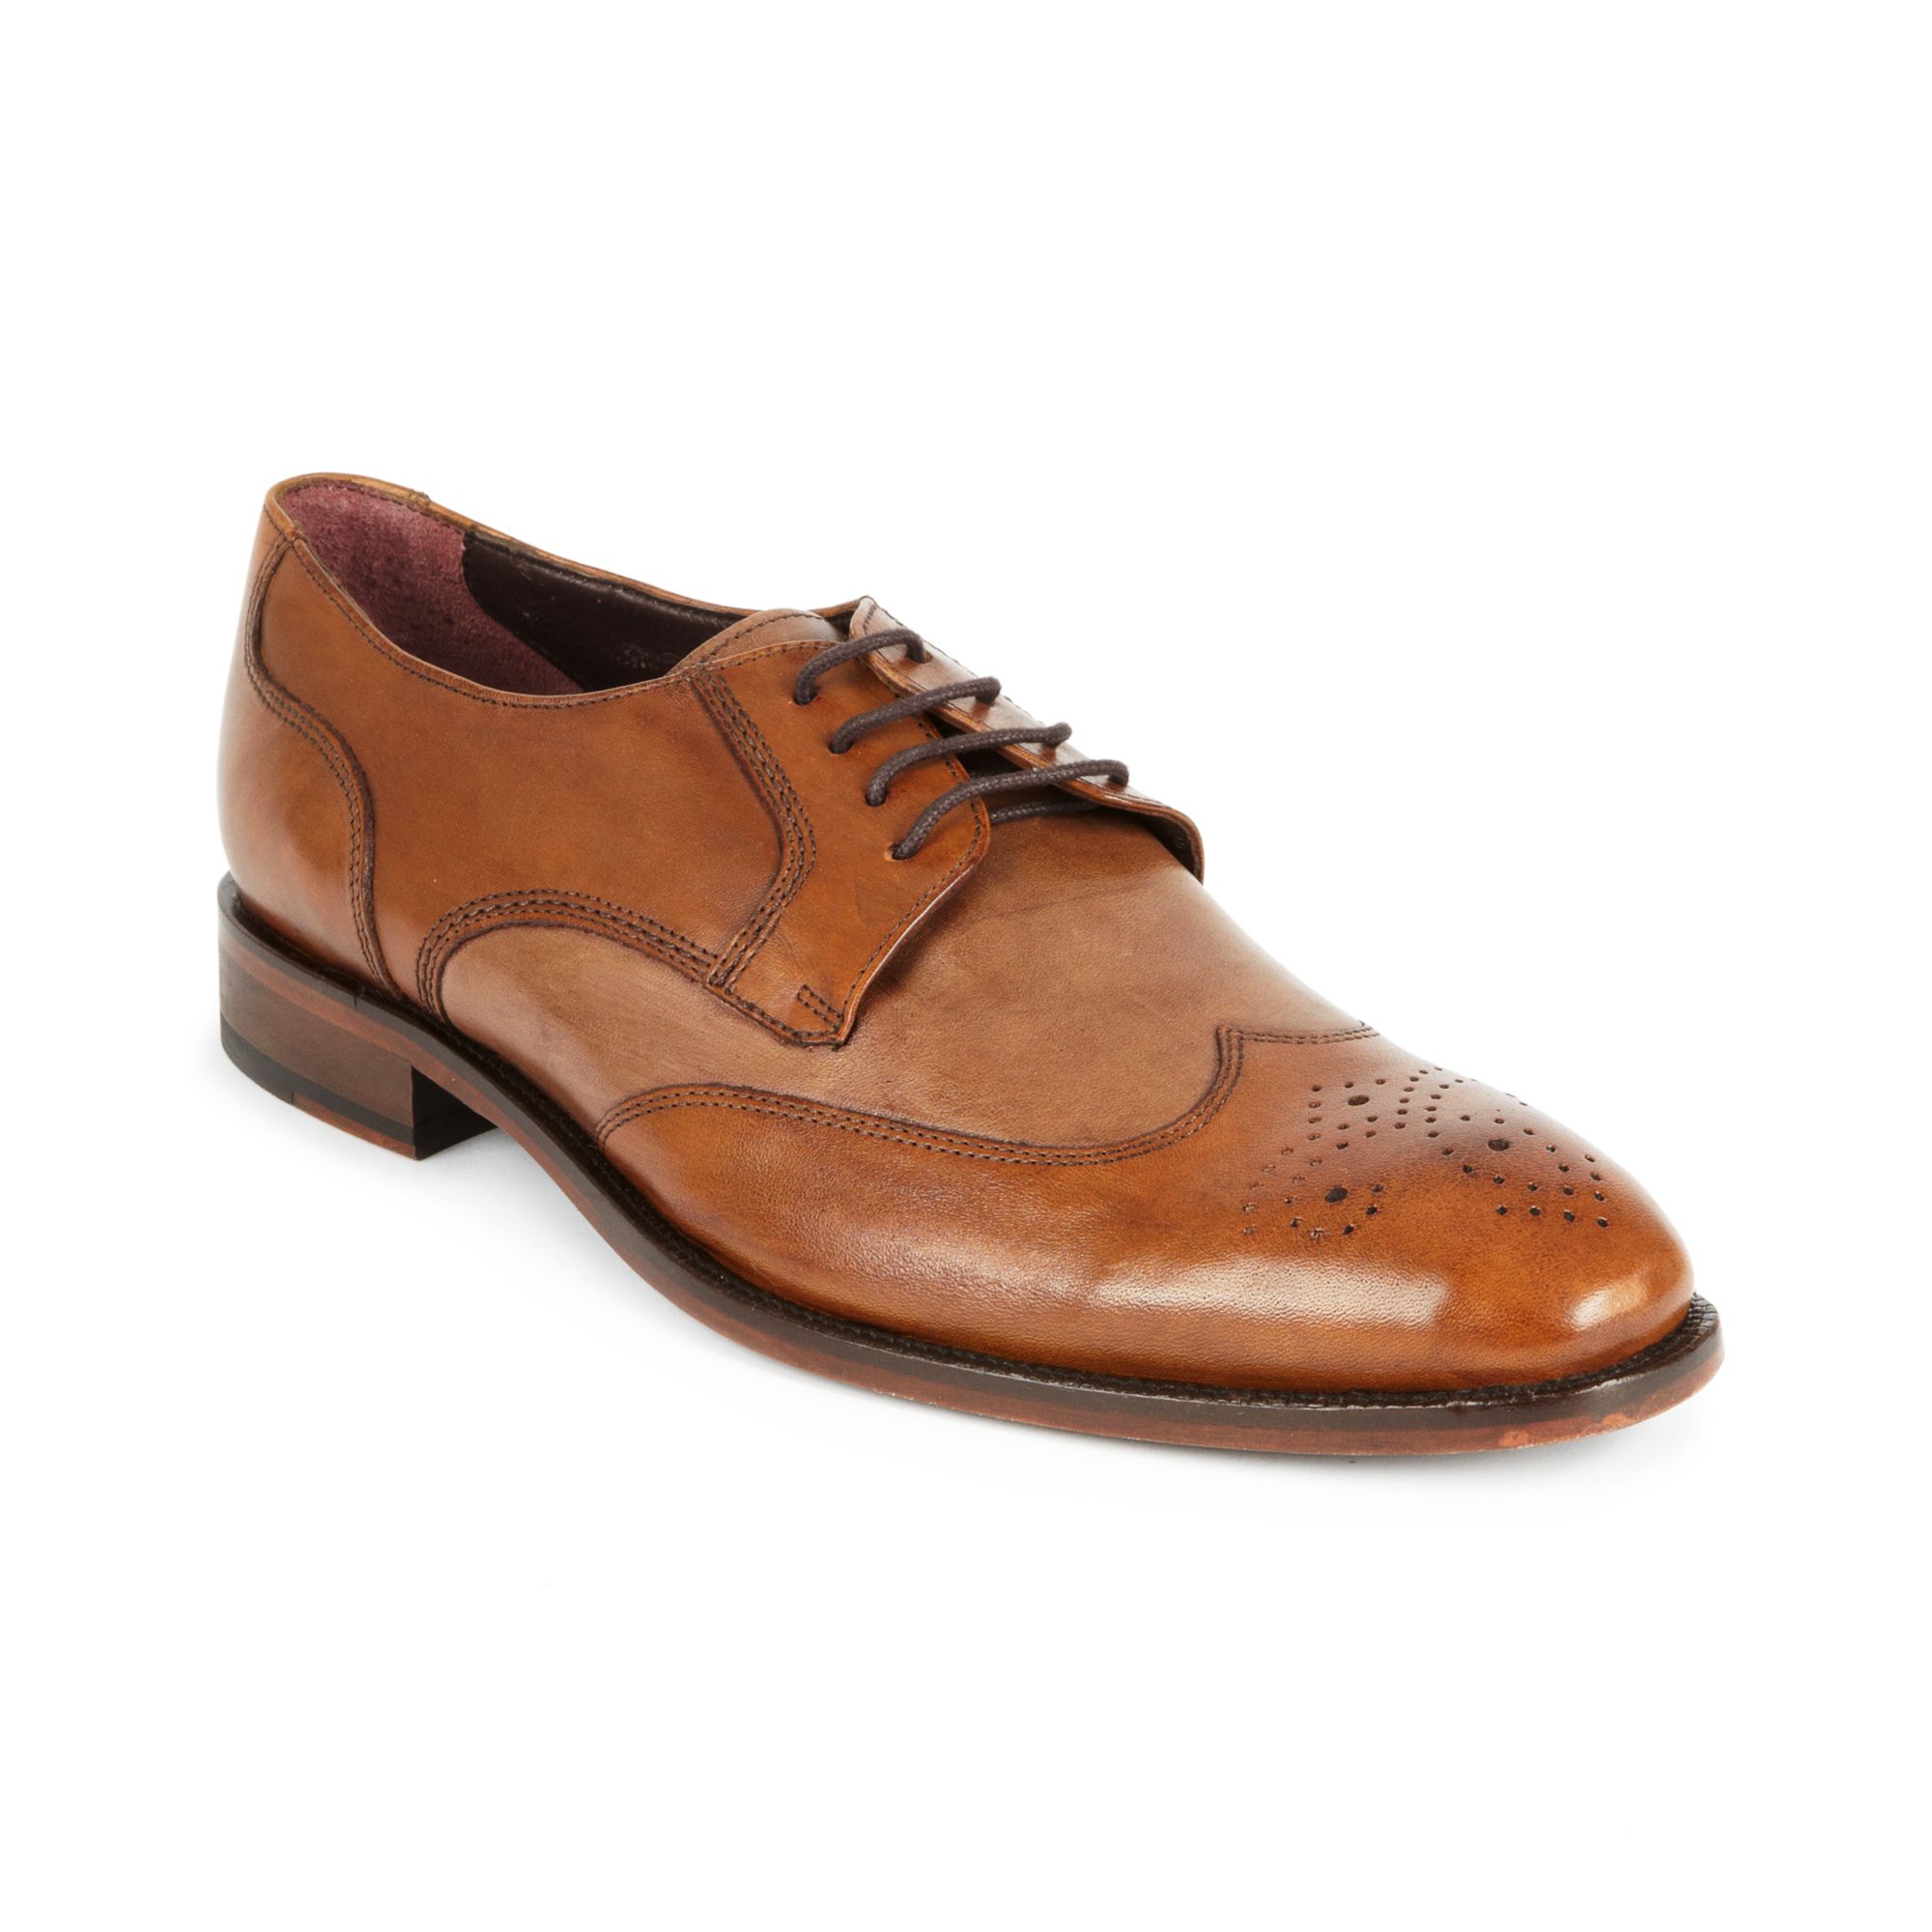 johnston and murphy two tone shoes